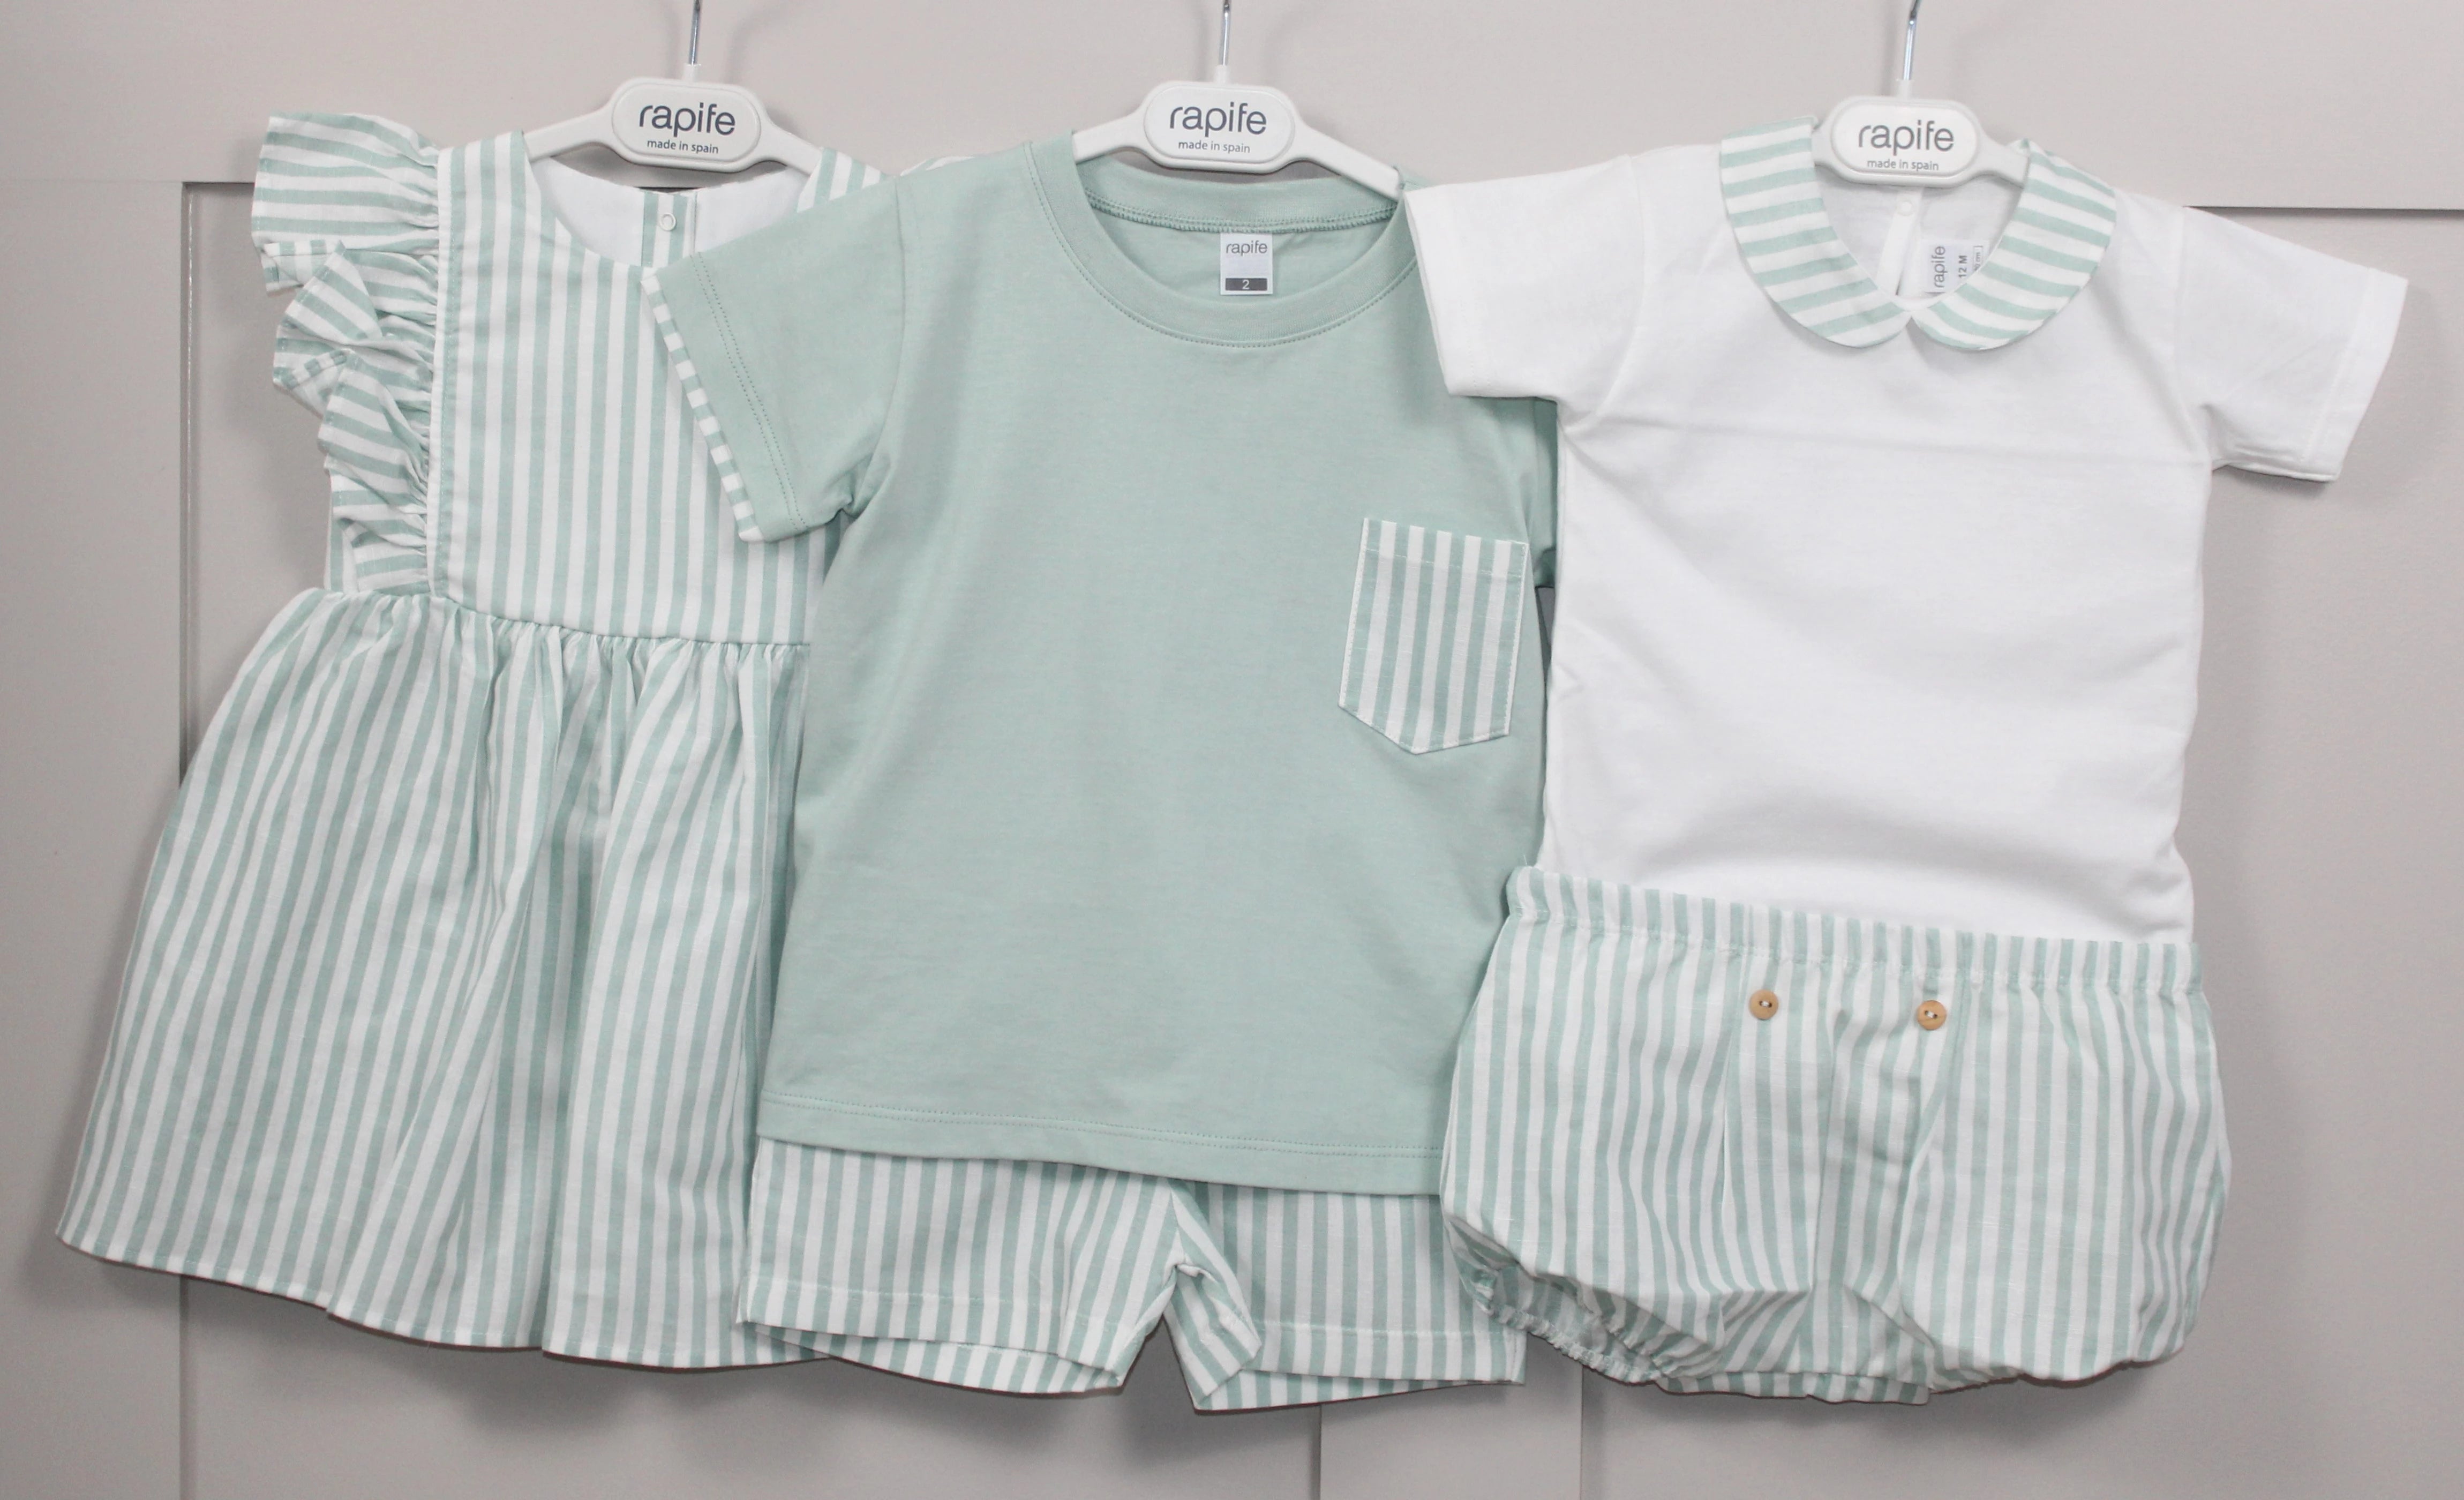 rapife Mint striped summer collection